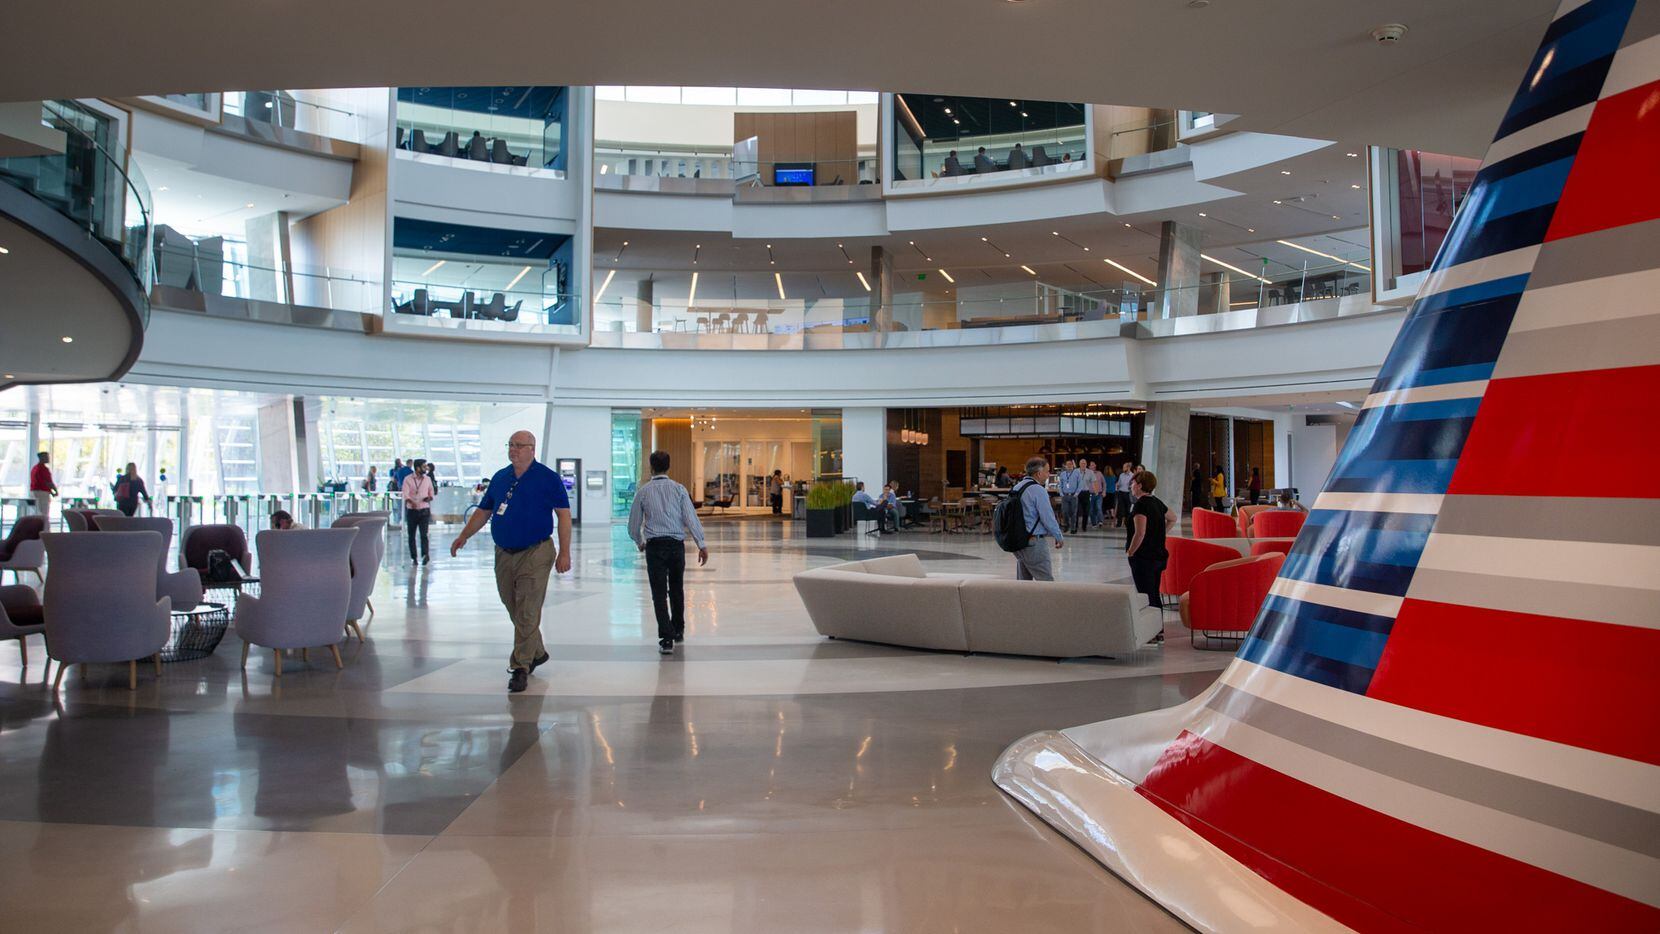 Employees walk through the main lobby of the Skyview 8 building at the new American Airlines campus and headquarters in Fort Worth, Texas, on Monday, Sep. 23, 2019. (Lynda M. Gonzalez/The Dallas Morning News)